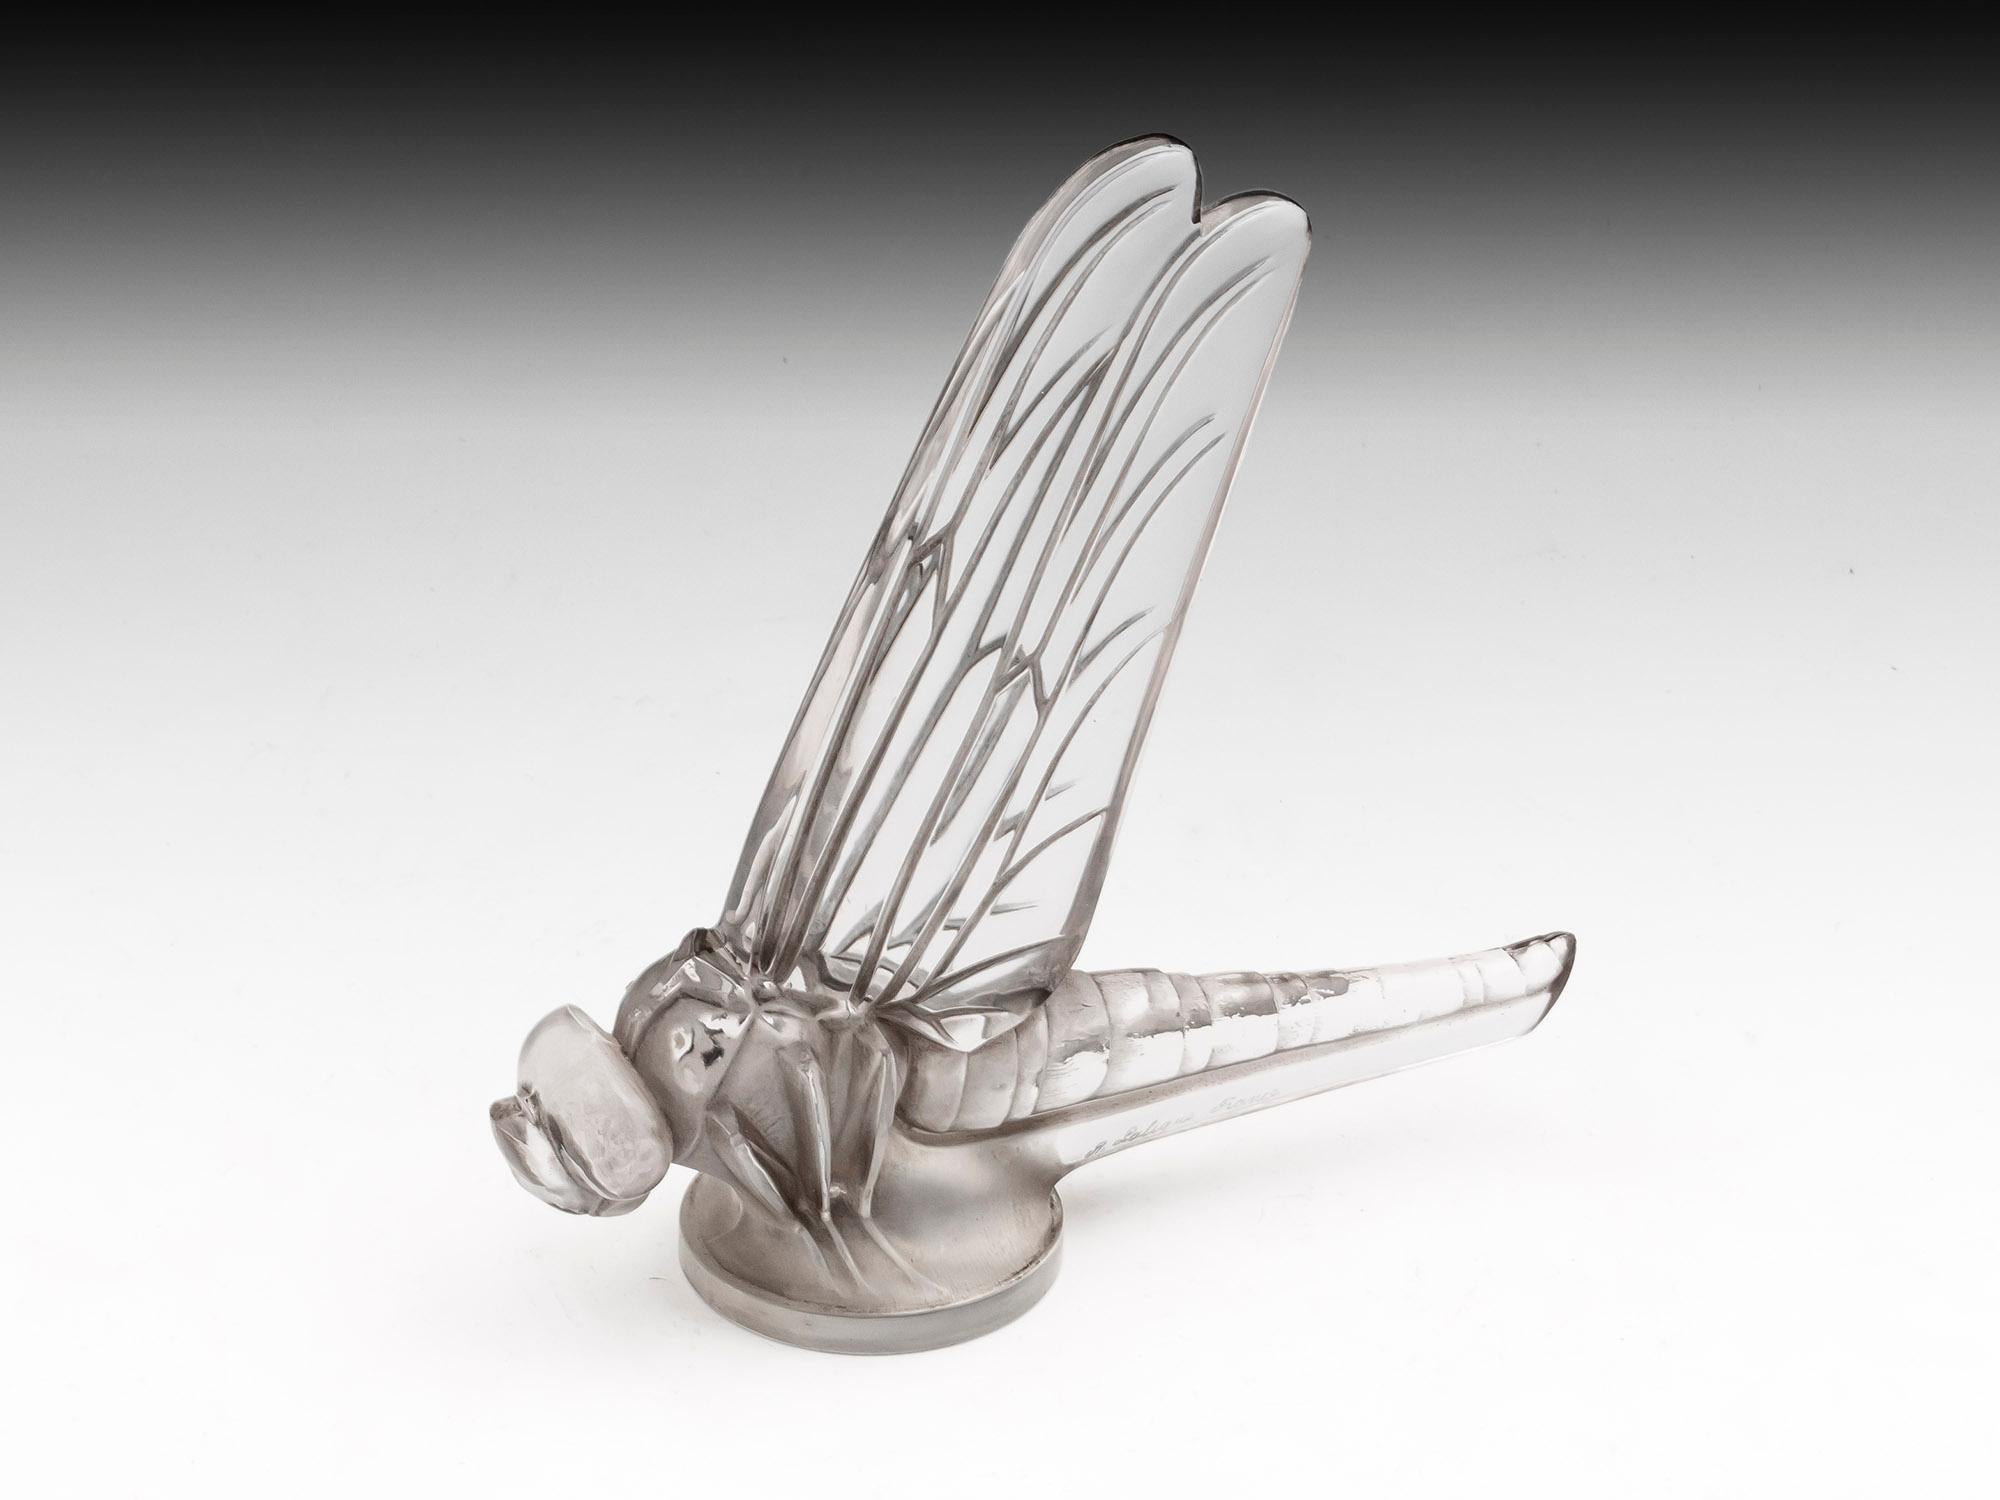 René Lalique car mascot, Grande Libellule / Large Dragonfly, great color and patination. Model number: #1144. Faint molded mark under body and etched on tail. 

This fabulous Dragonfly Carmascot by René Lalique is being offered for sale in A1